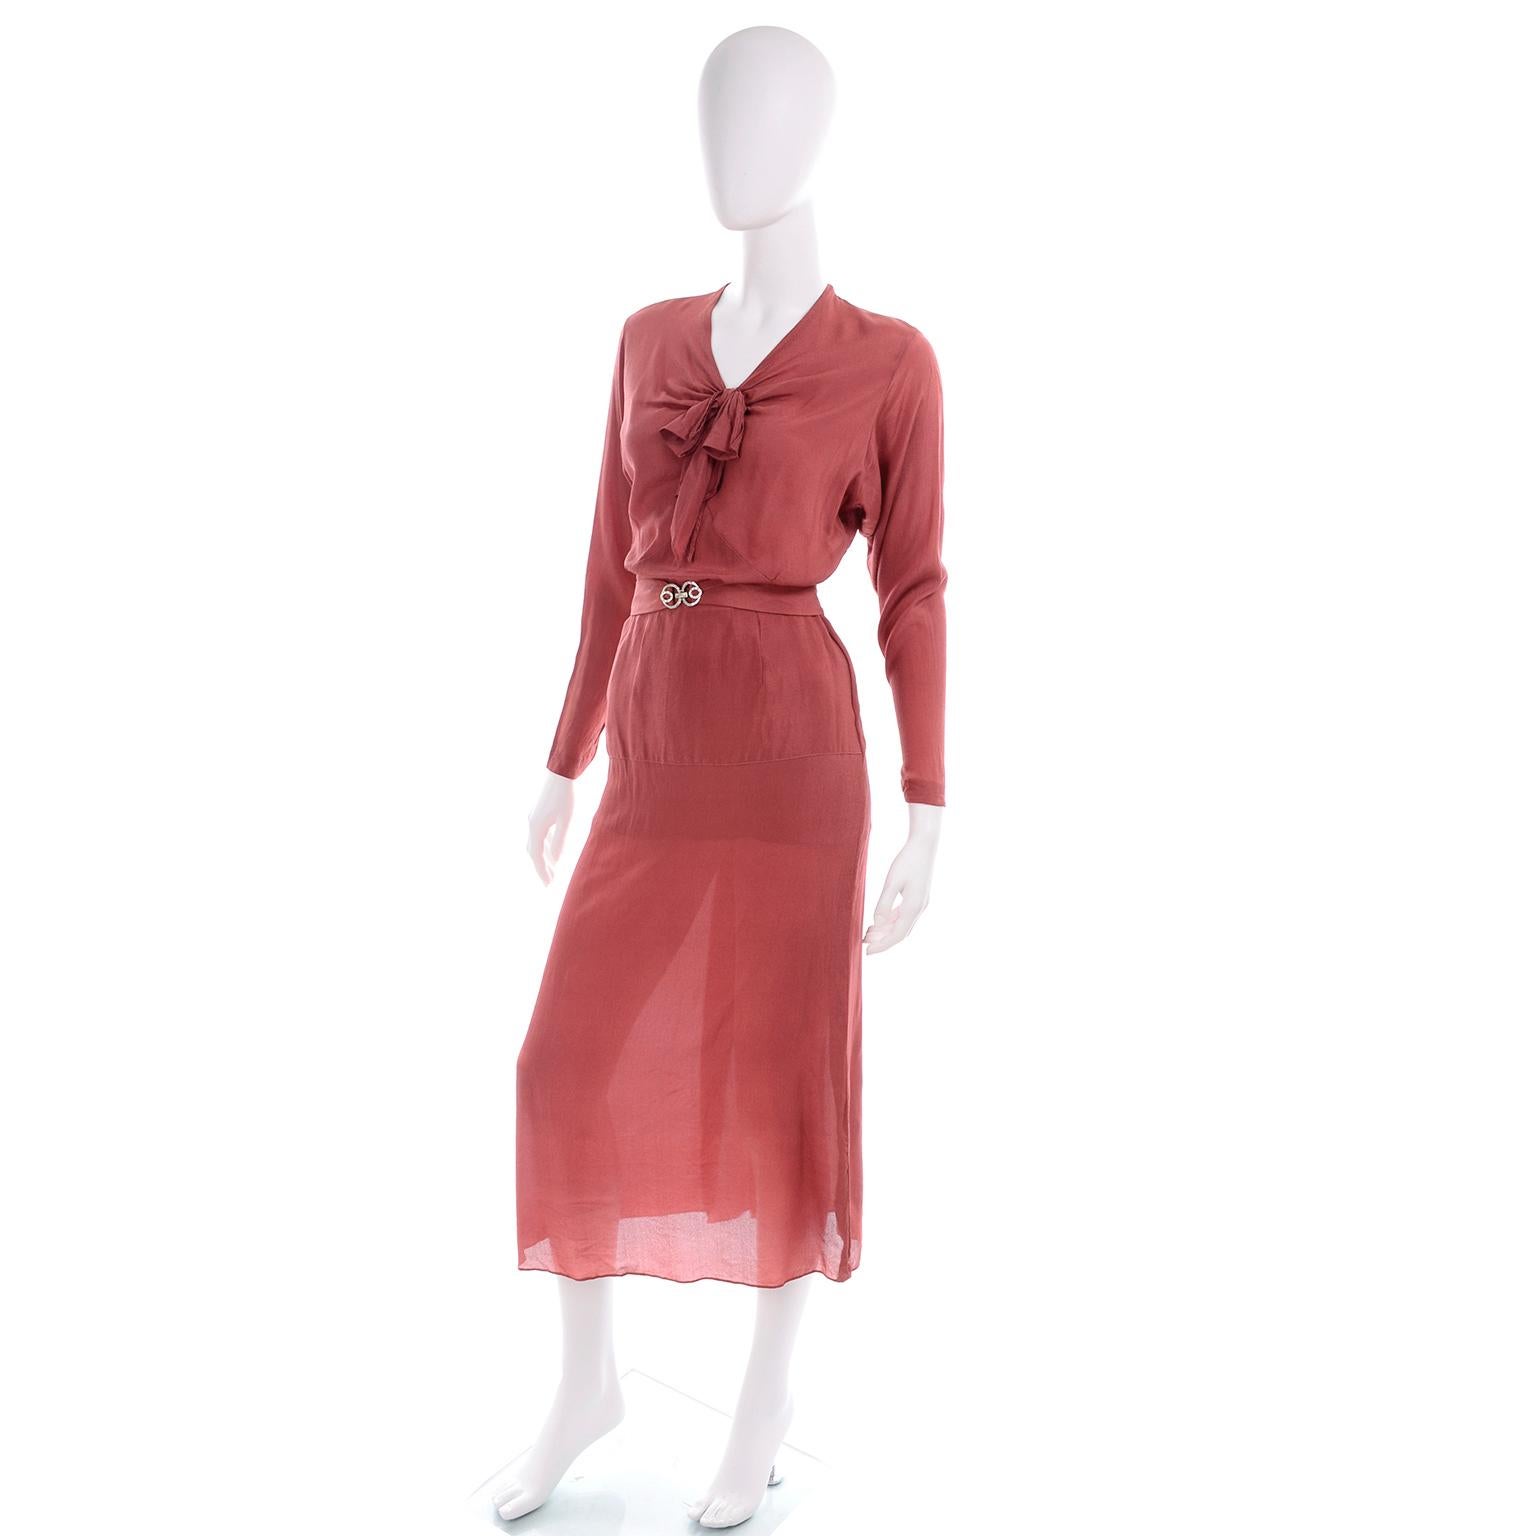 1930s Rusty Red Silk Vintage 2 Pc Bias Dress With Rhinestone Belt and Tie In Good Condition For Sale In Portland, OR